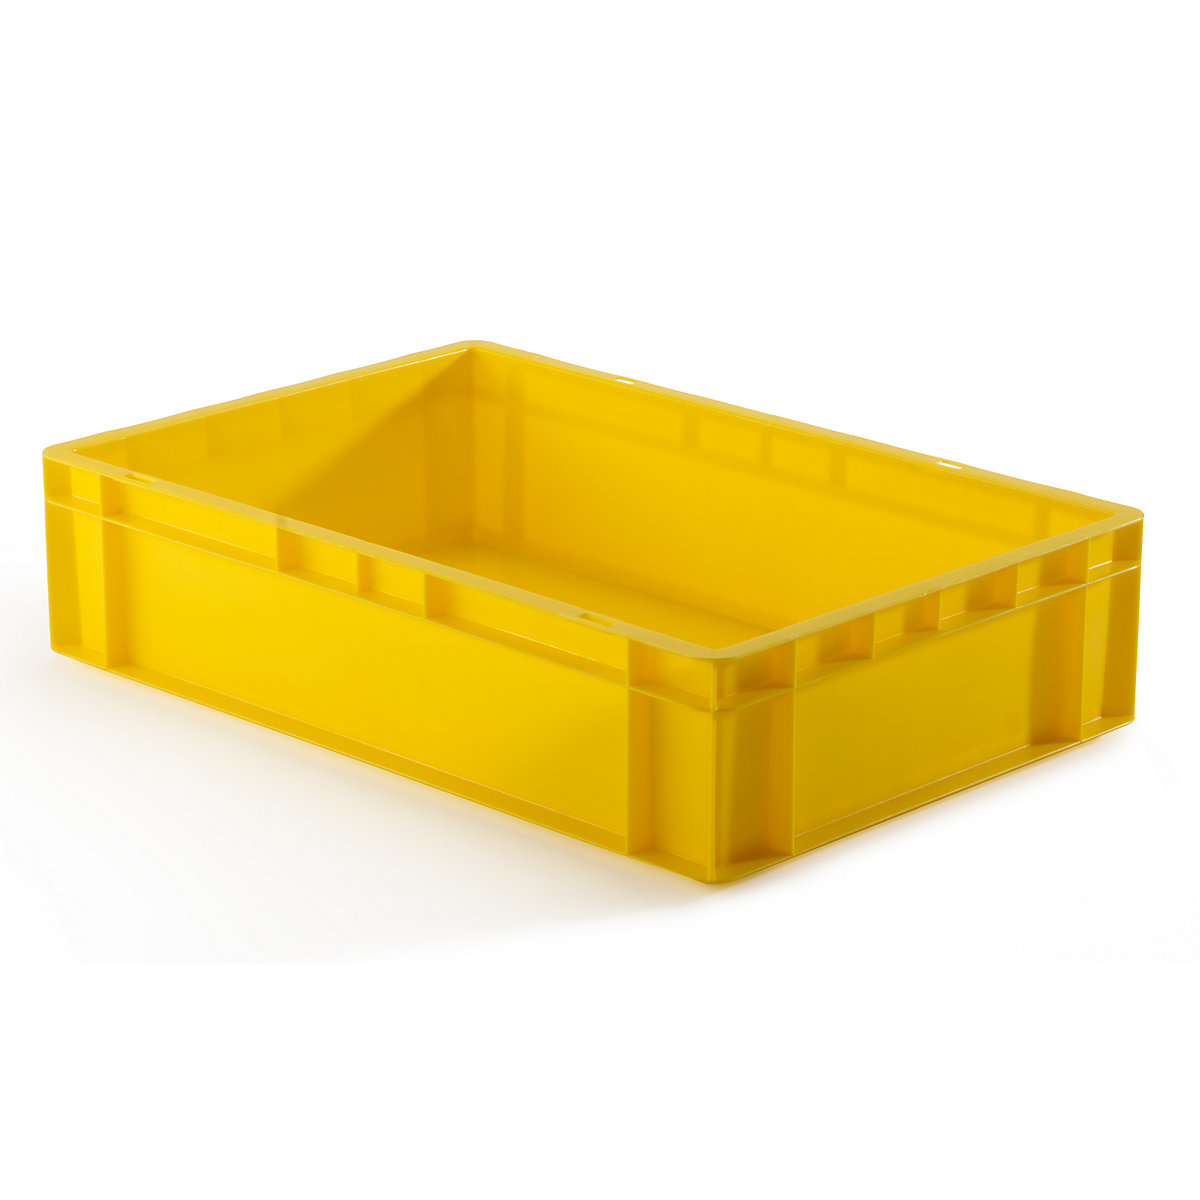 Euro stacking container, closed walls and base, LxWxH 600 x 400 x 145 mm, yellow, pack of 5